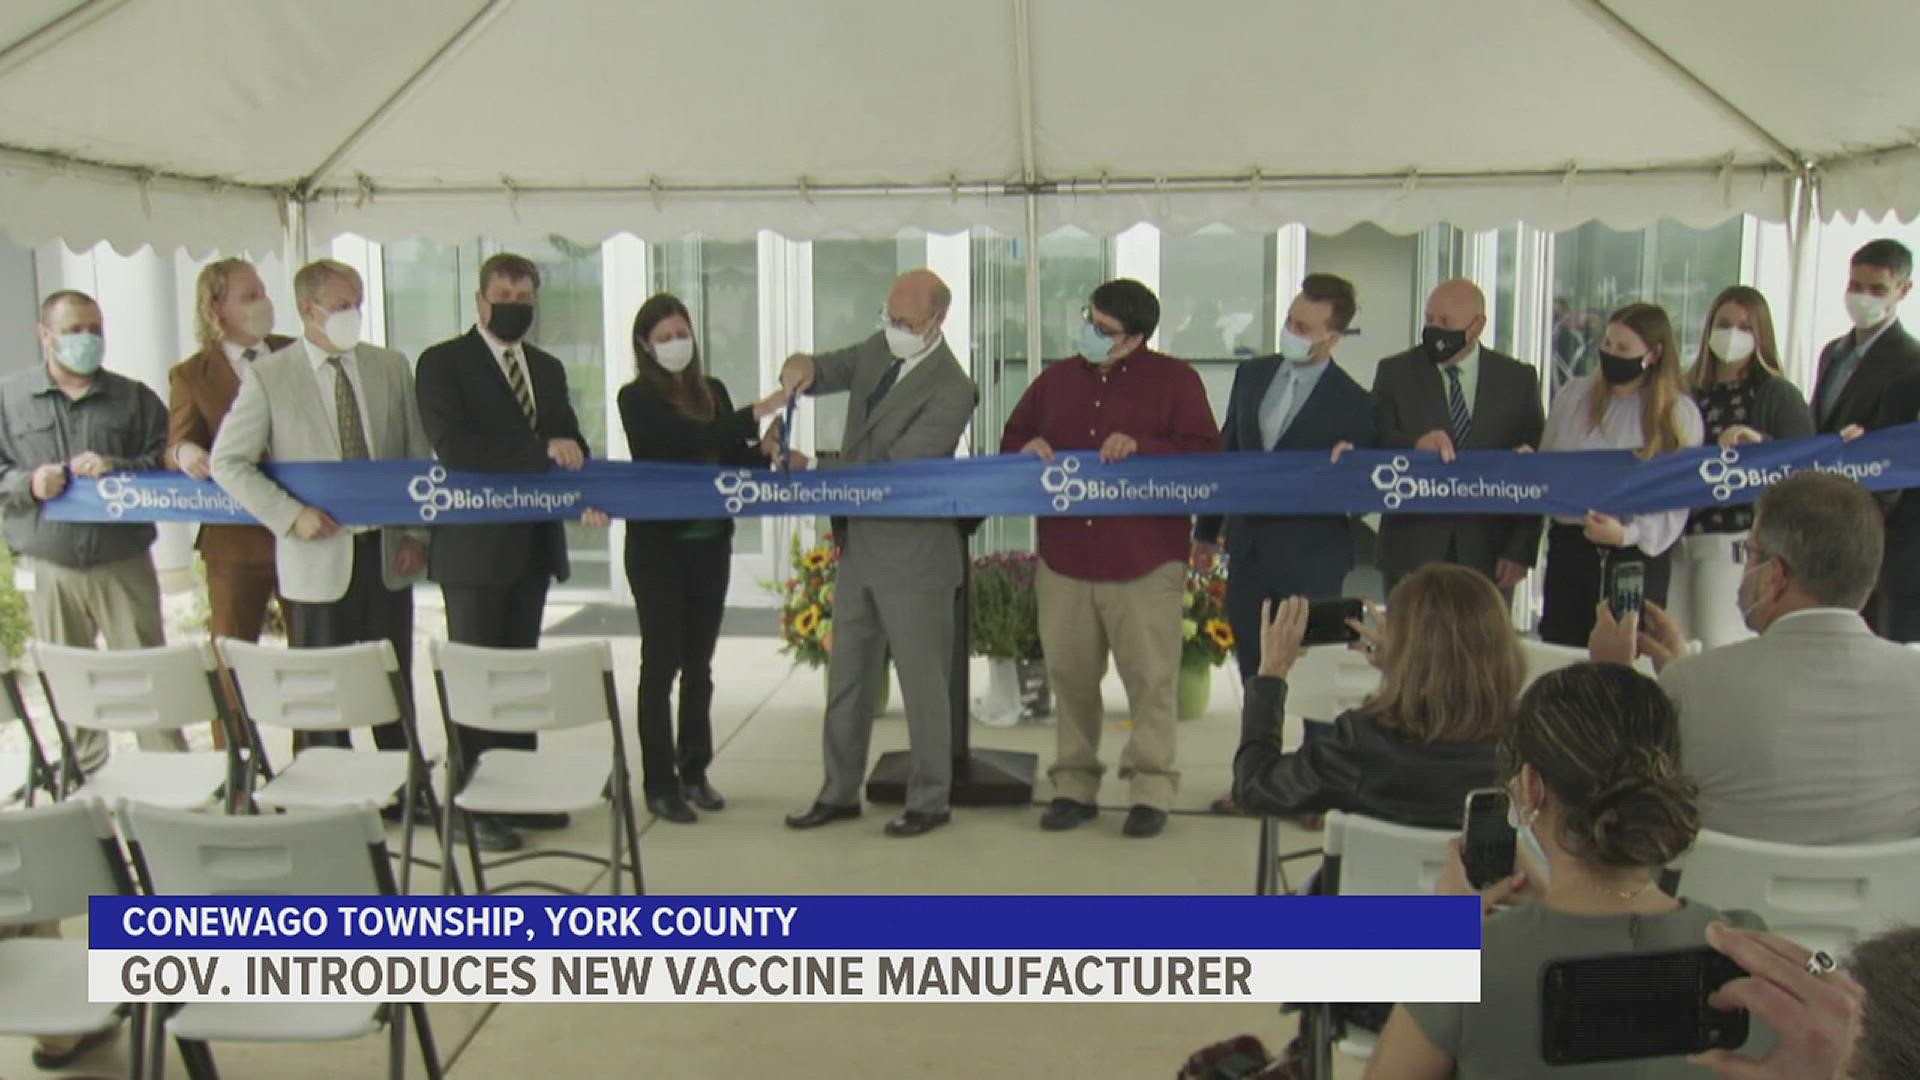 BioTechnique relocated its company from Wisconsin to Pennsylvania, bringing over a $22 million dollar investment to York County.